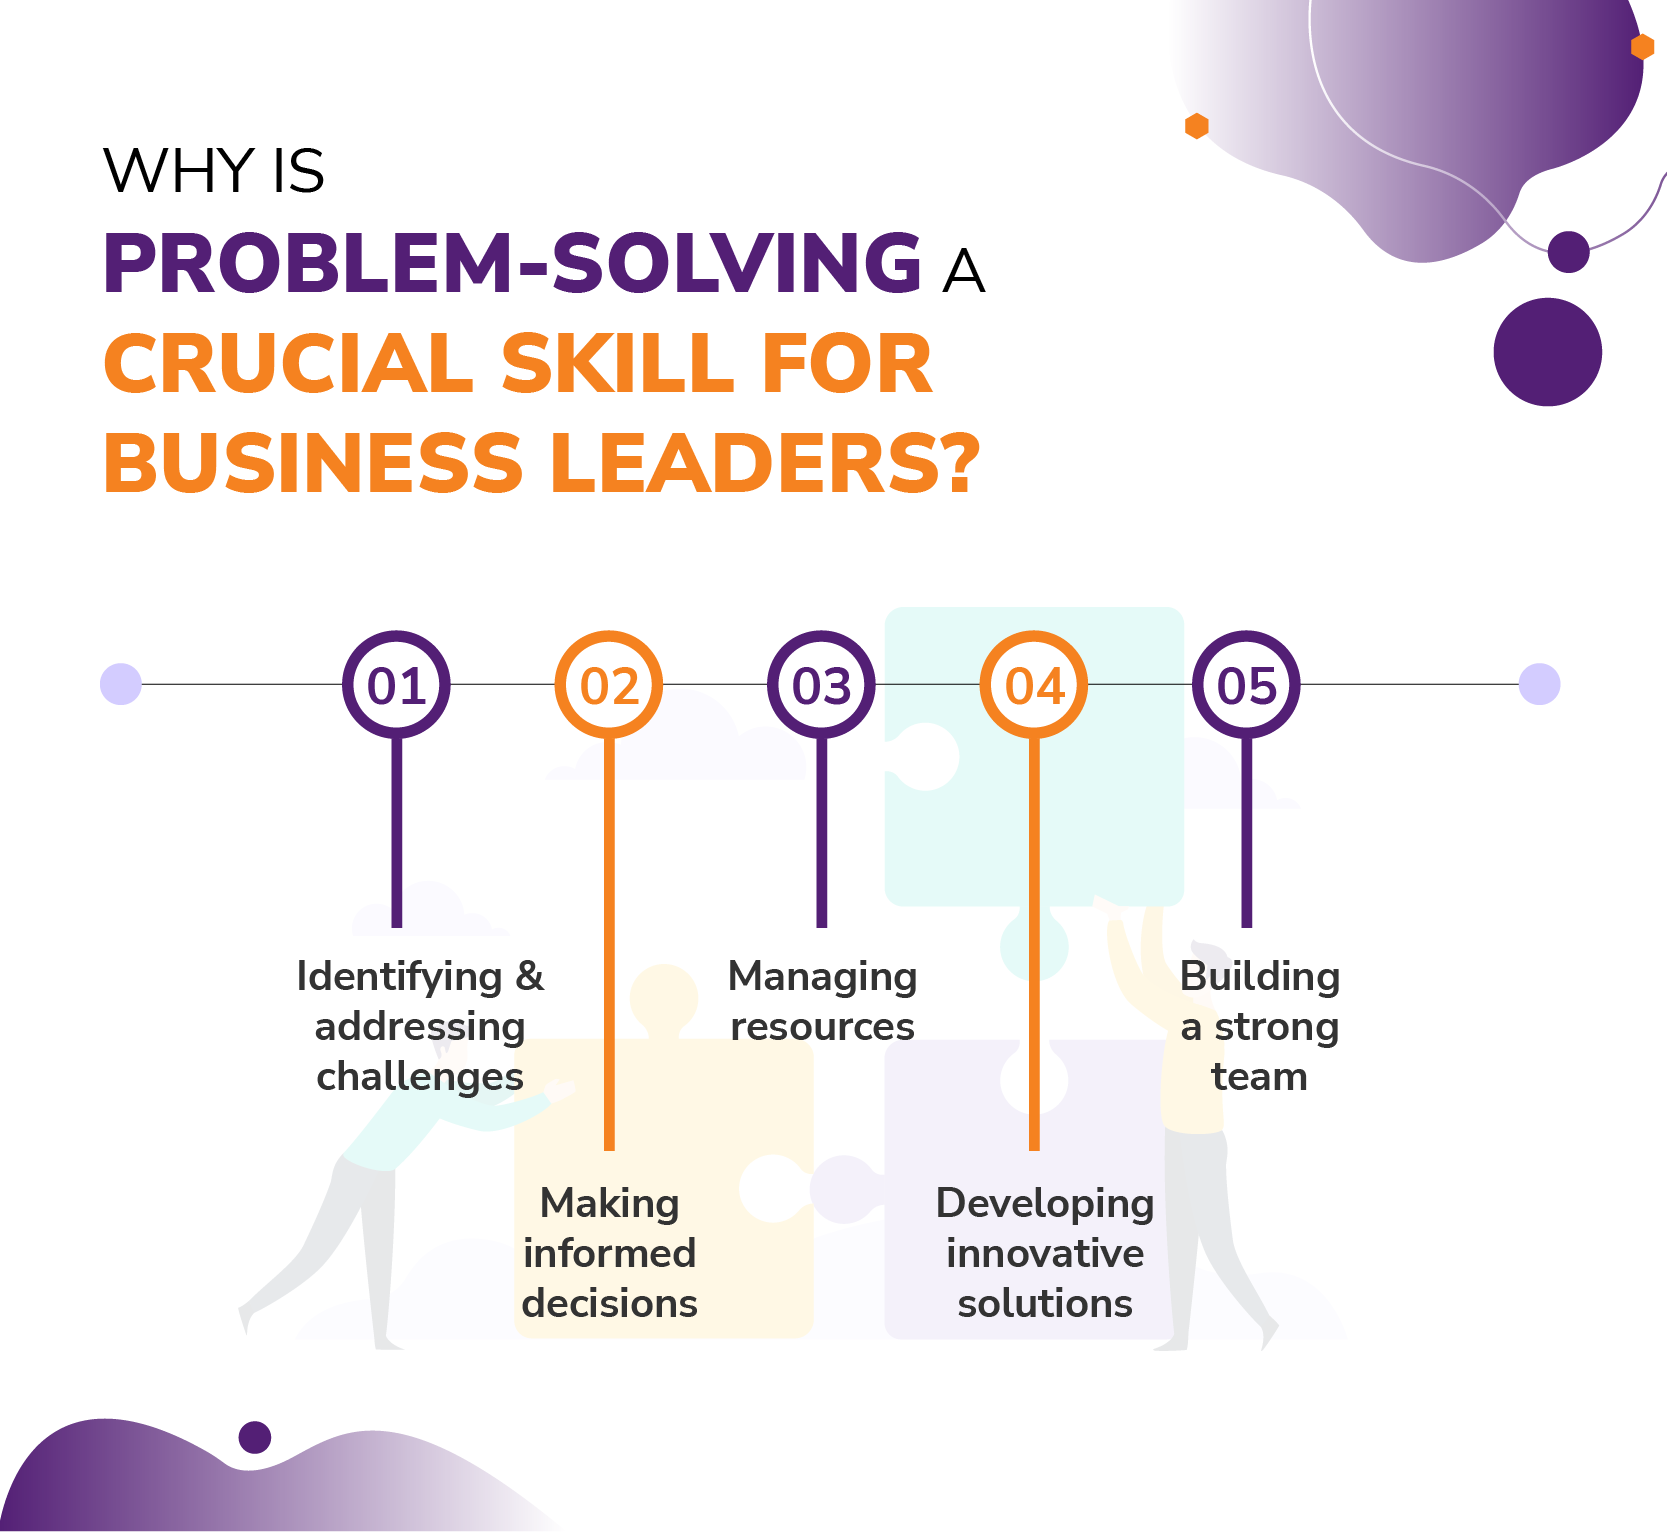 problem solving and decision making for leaders